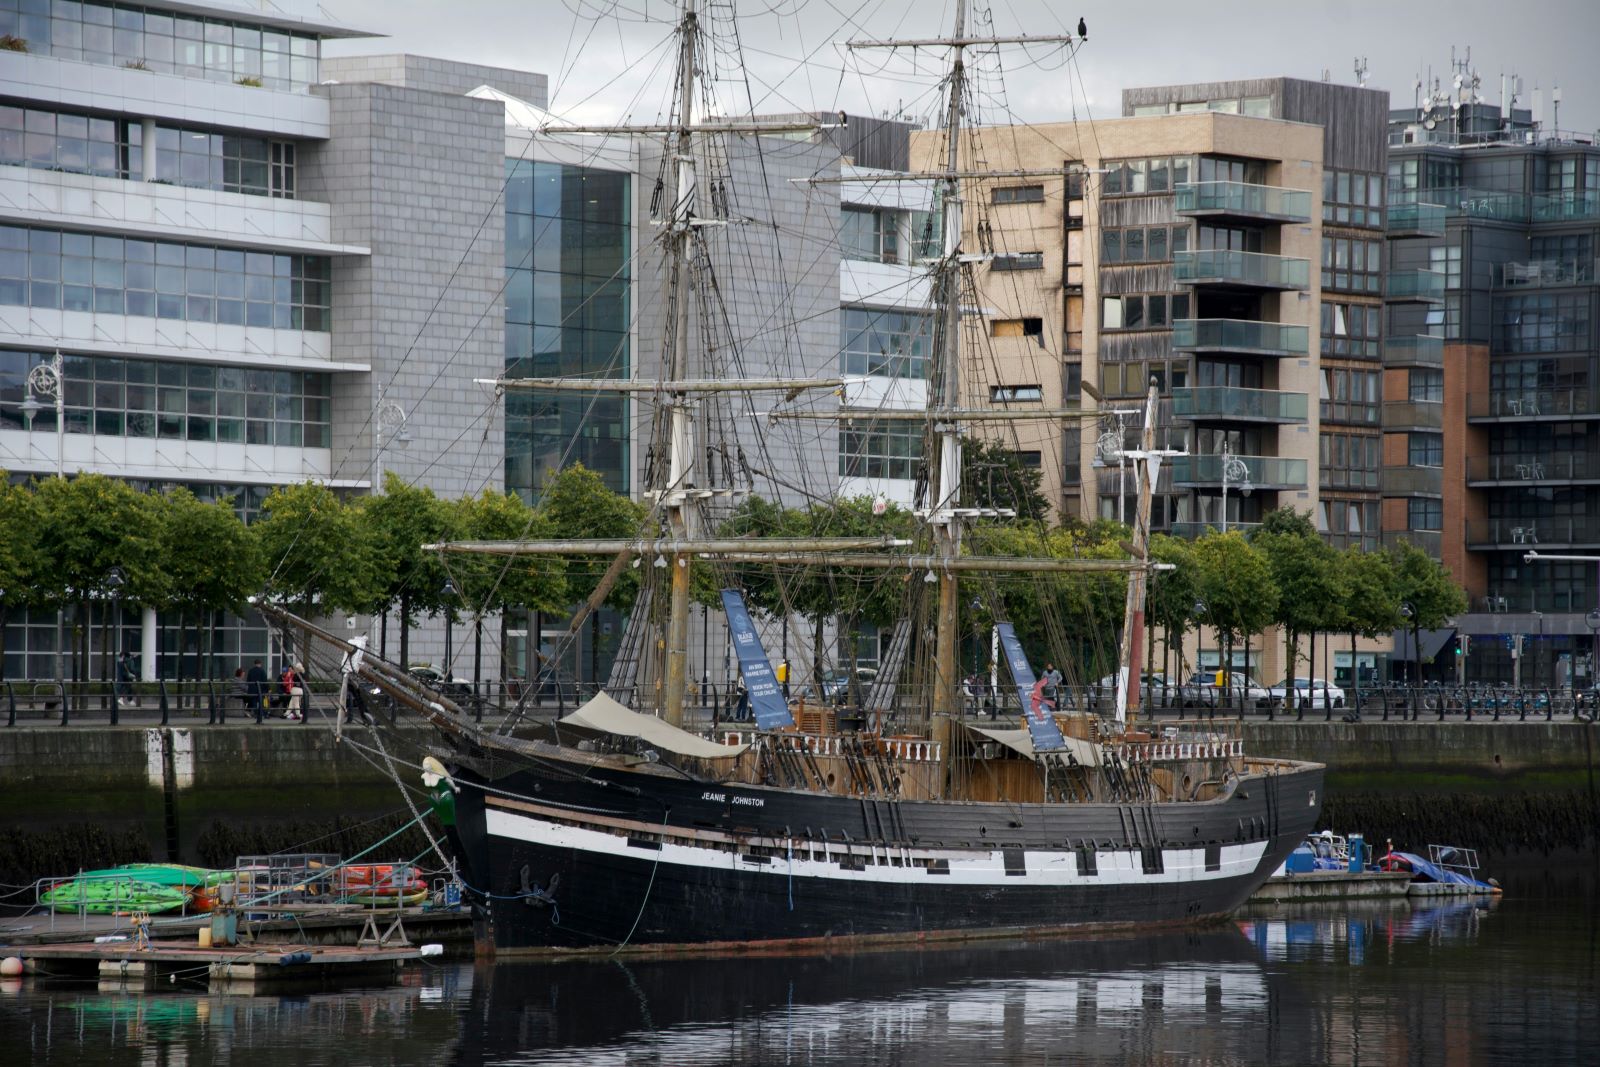 <p class="wp-caption-text">Image Credit: Pexel / Alexander Kaliberda</p>  <p>Visit the Jeanie Johnston, a replica of a famine ship that transported emigrants to North America. It’s a moving tribute to those who left Ireland during the Great Famine.</p>